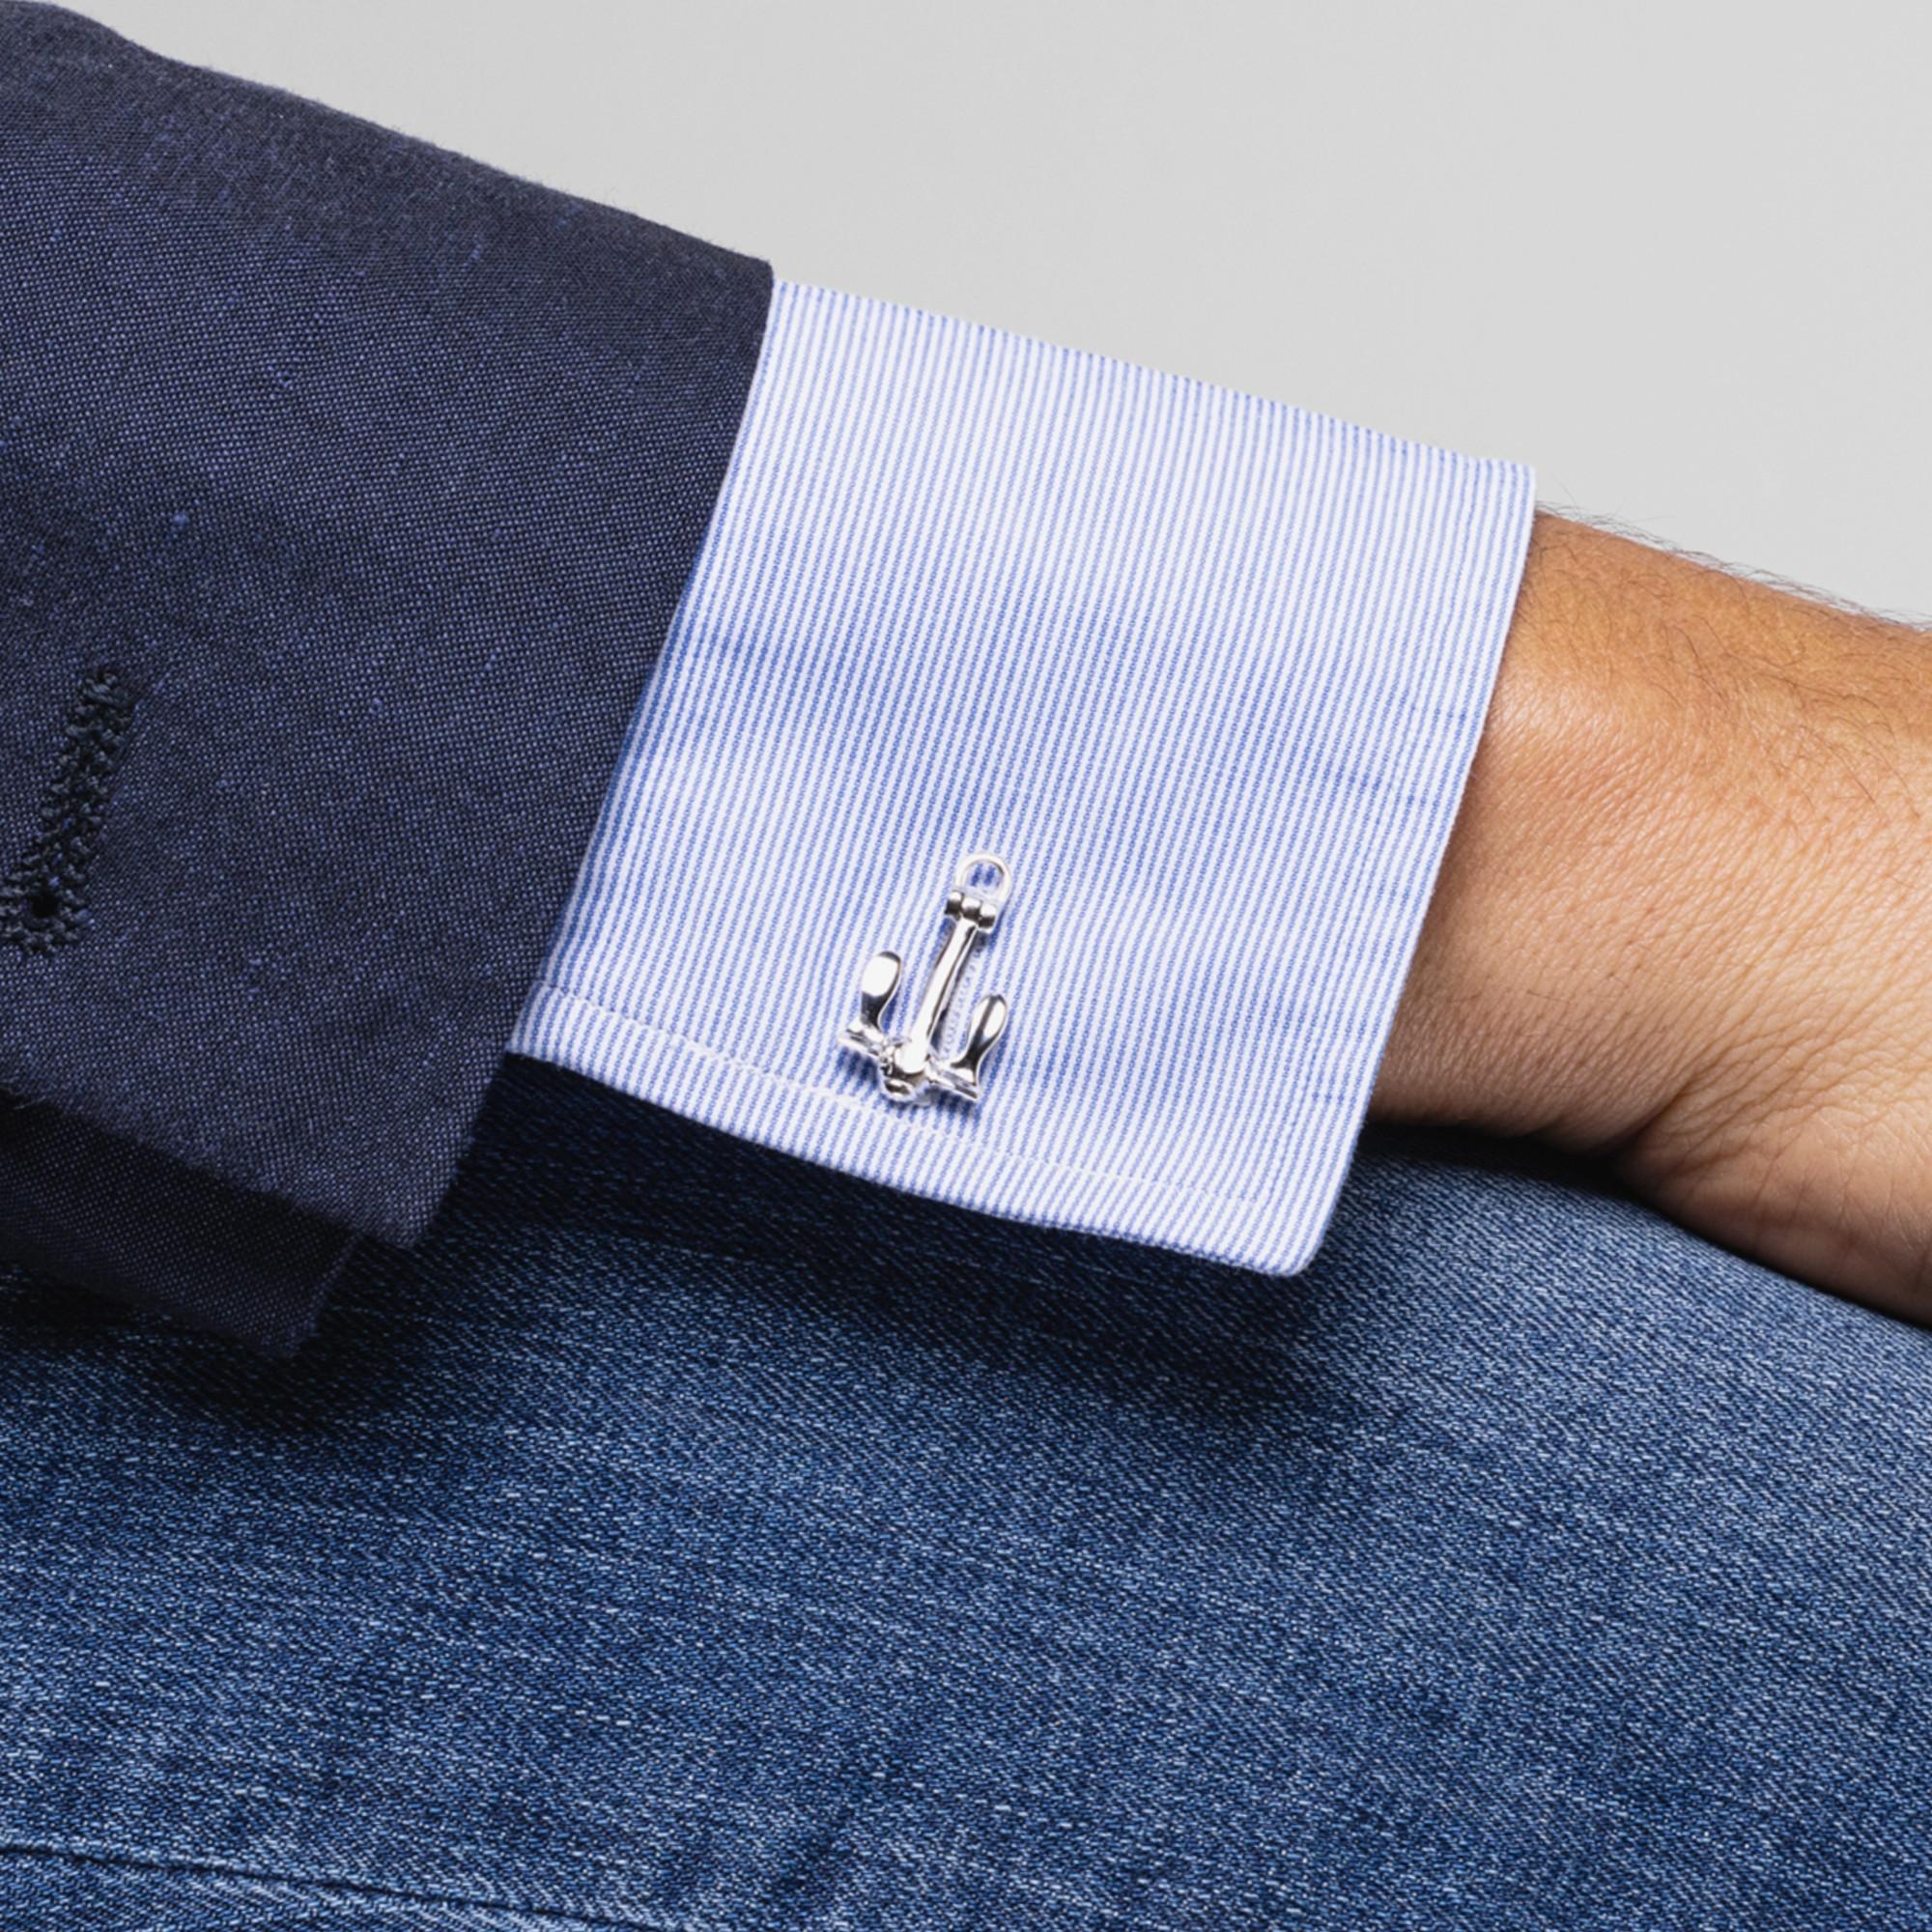 Alex Jona Ship's Anchor Sterling Silver Cufflinks In New Condition For Sale In Torino, IT